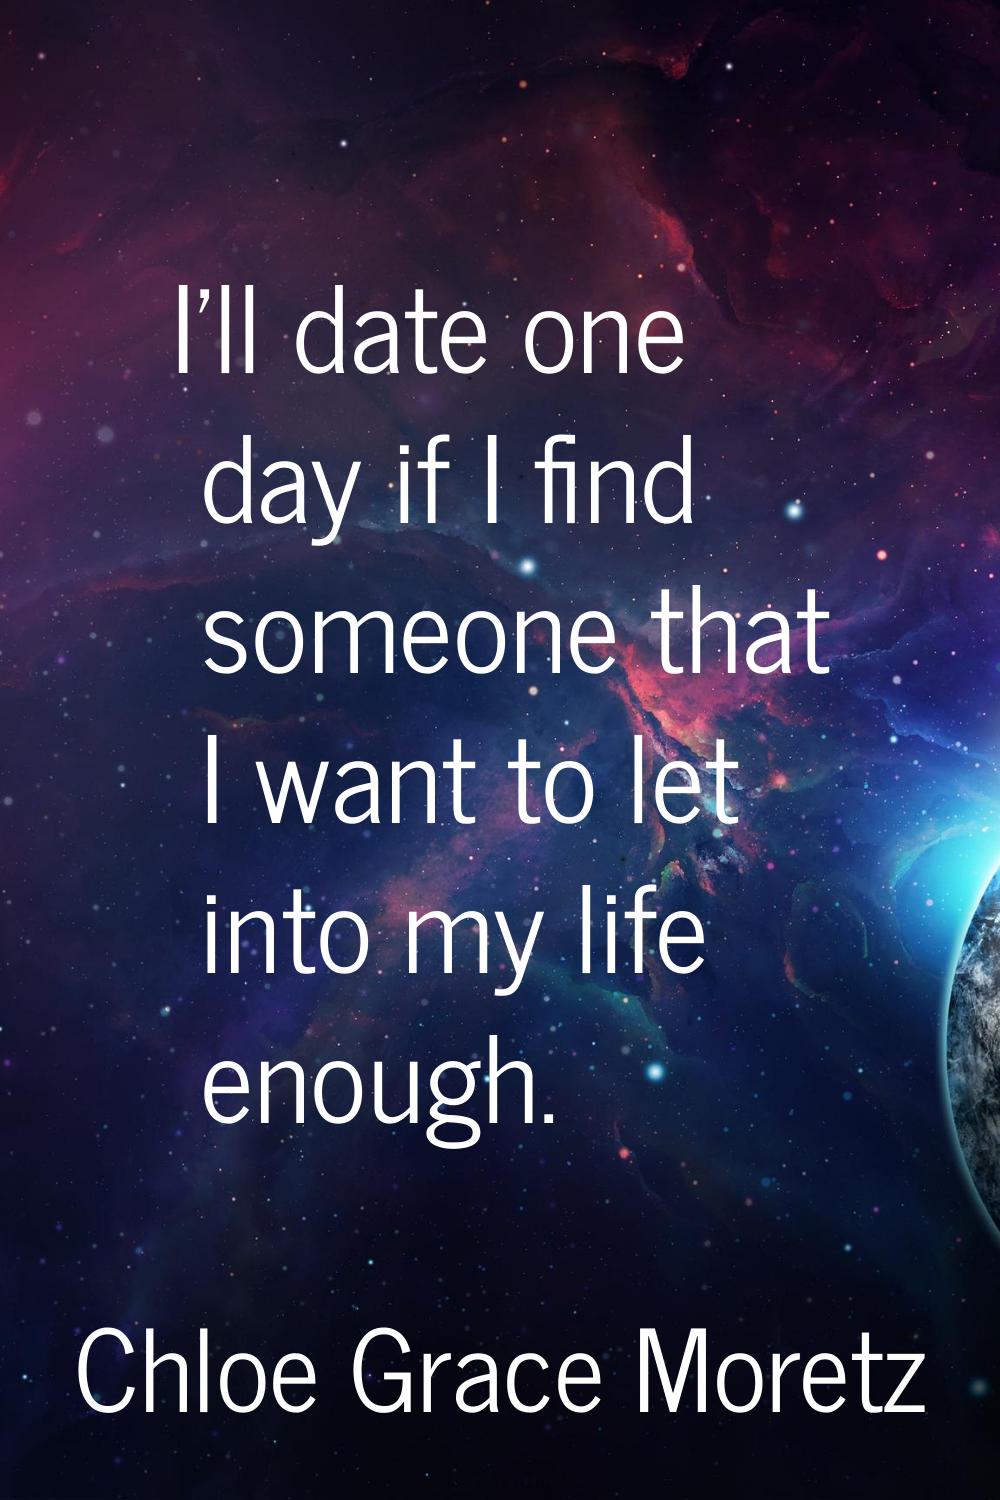 I'll date one day if I find someone that I want to let into my life enough.